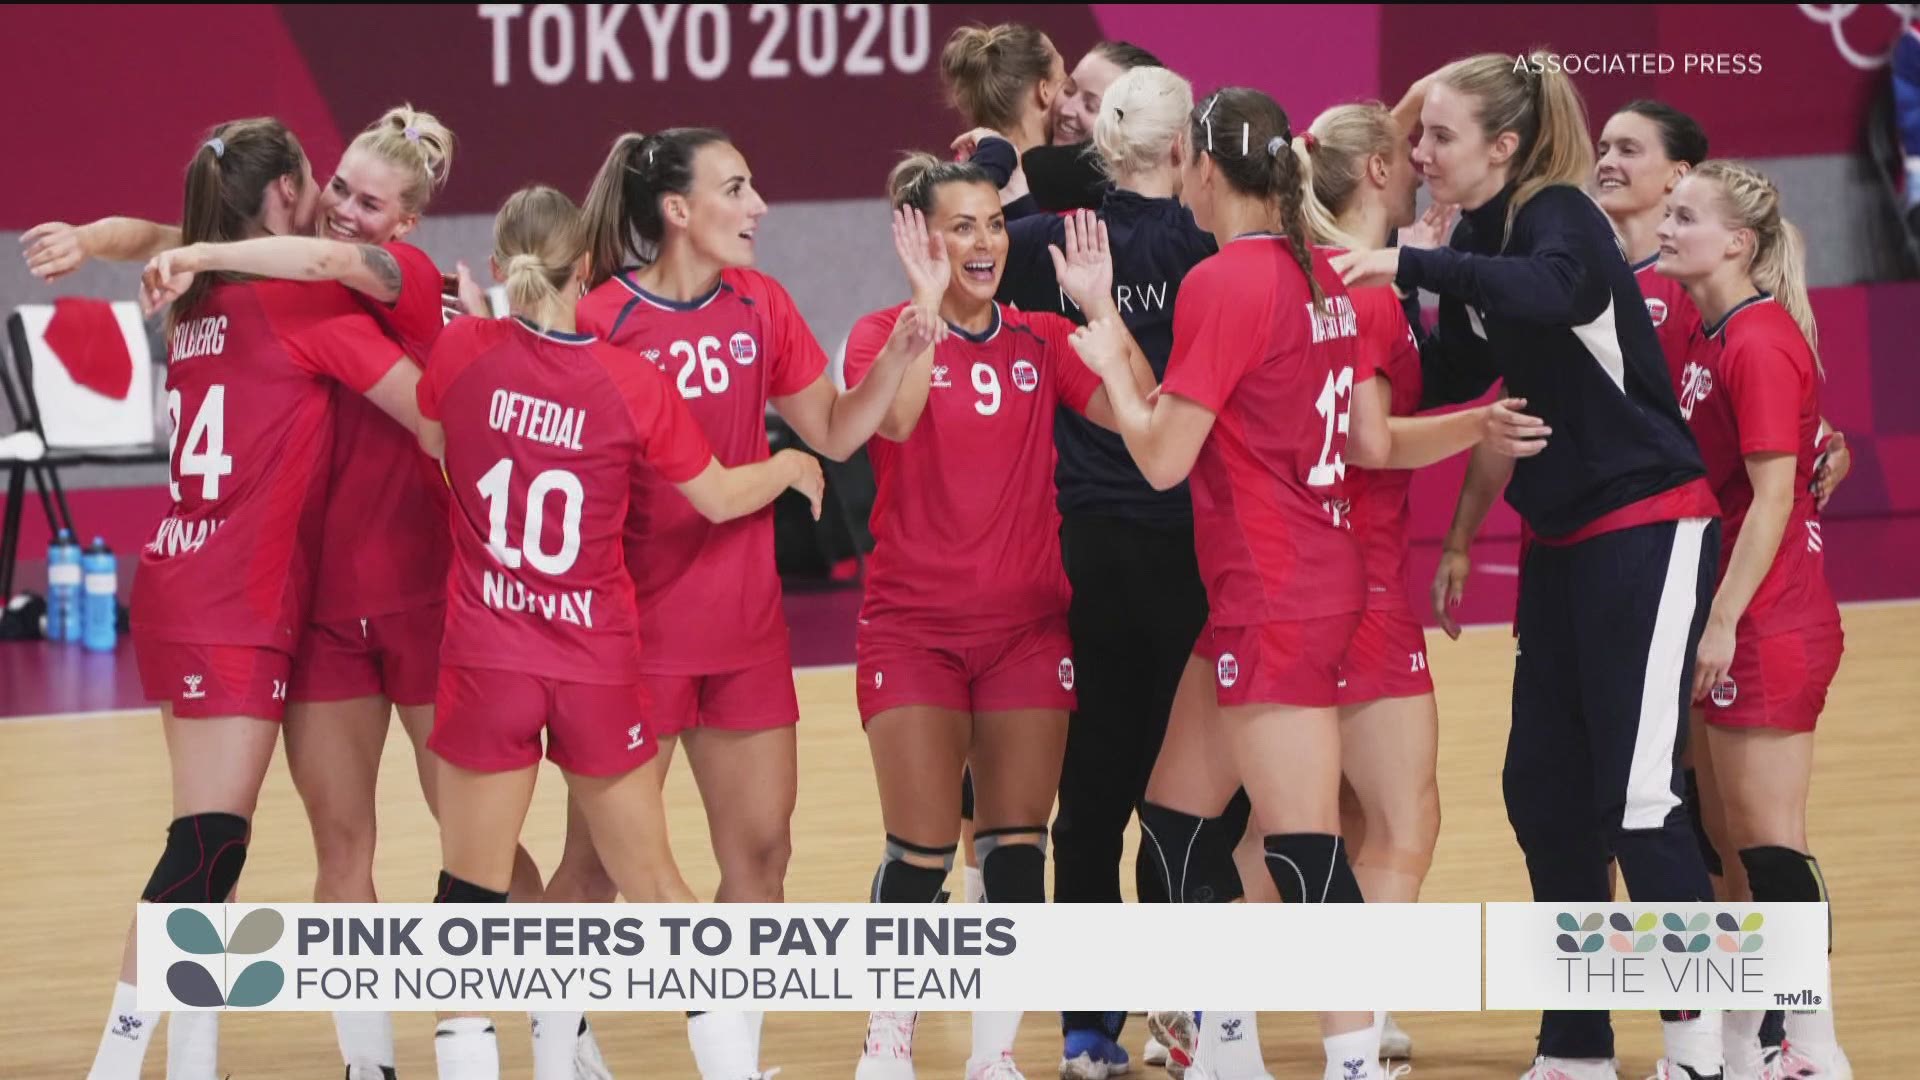 Singer Pink offered to pay the fines for the Norwegian women's beach handball team after they were fined for choosing to wear more modest competition outfits.